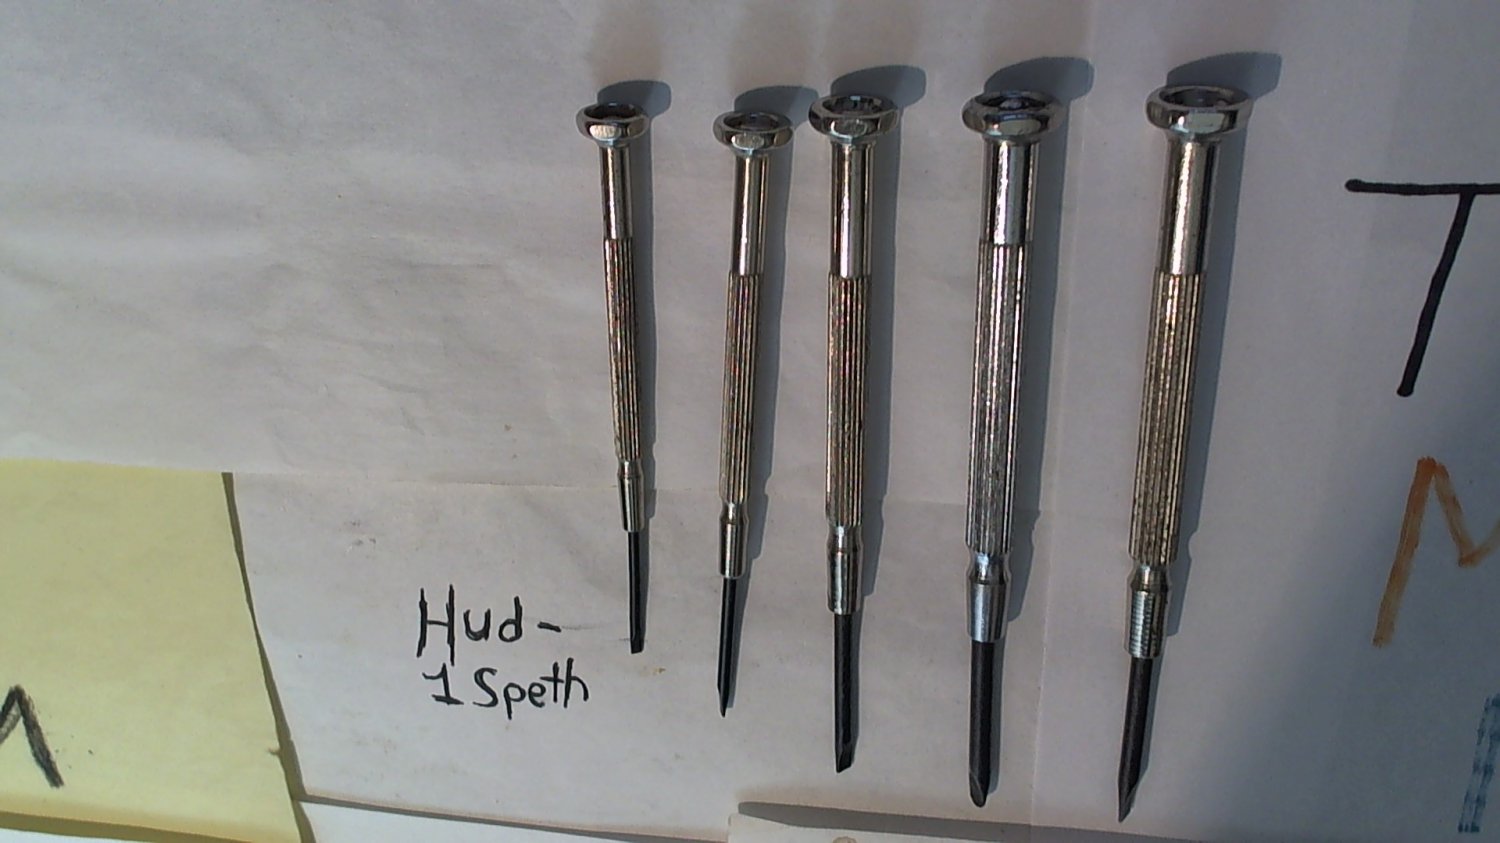 5 (Used) Jewelers Watchmakers Screwdrivers